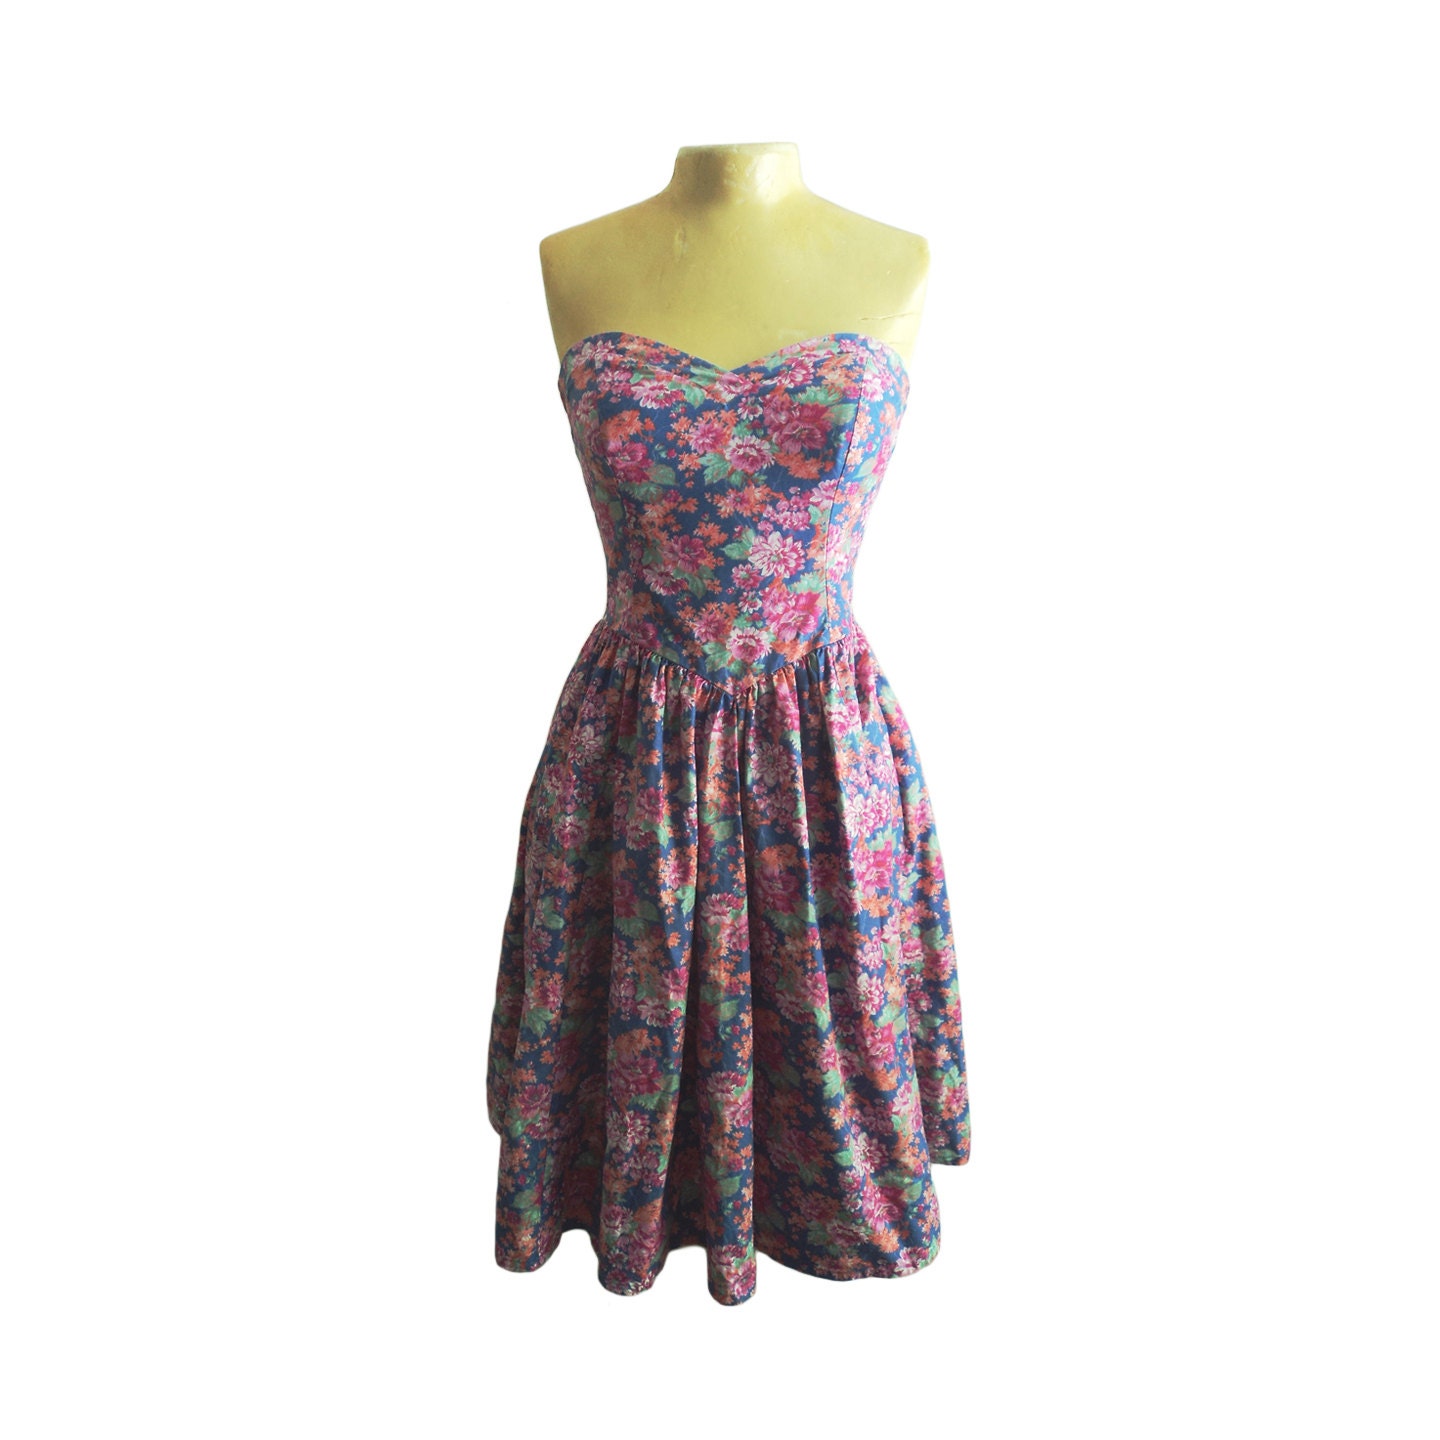 Vintage Laura Ashley Floral Party Dress by ModernGhostBK on Etsy